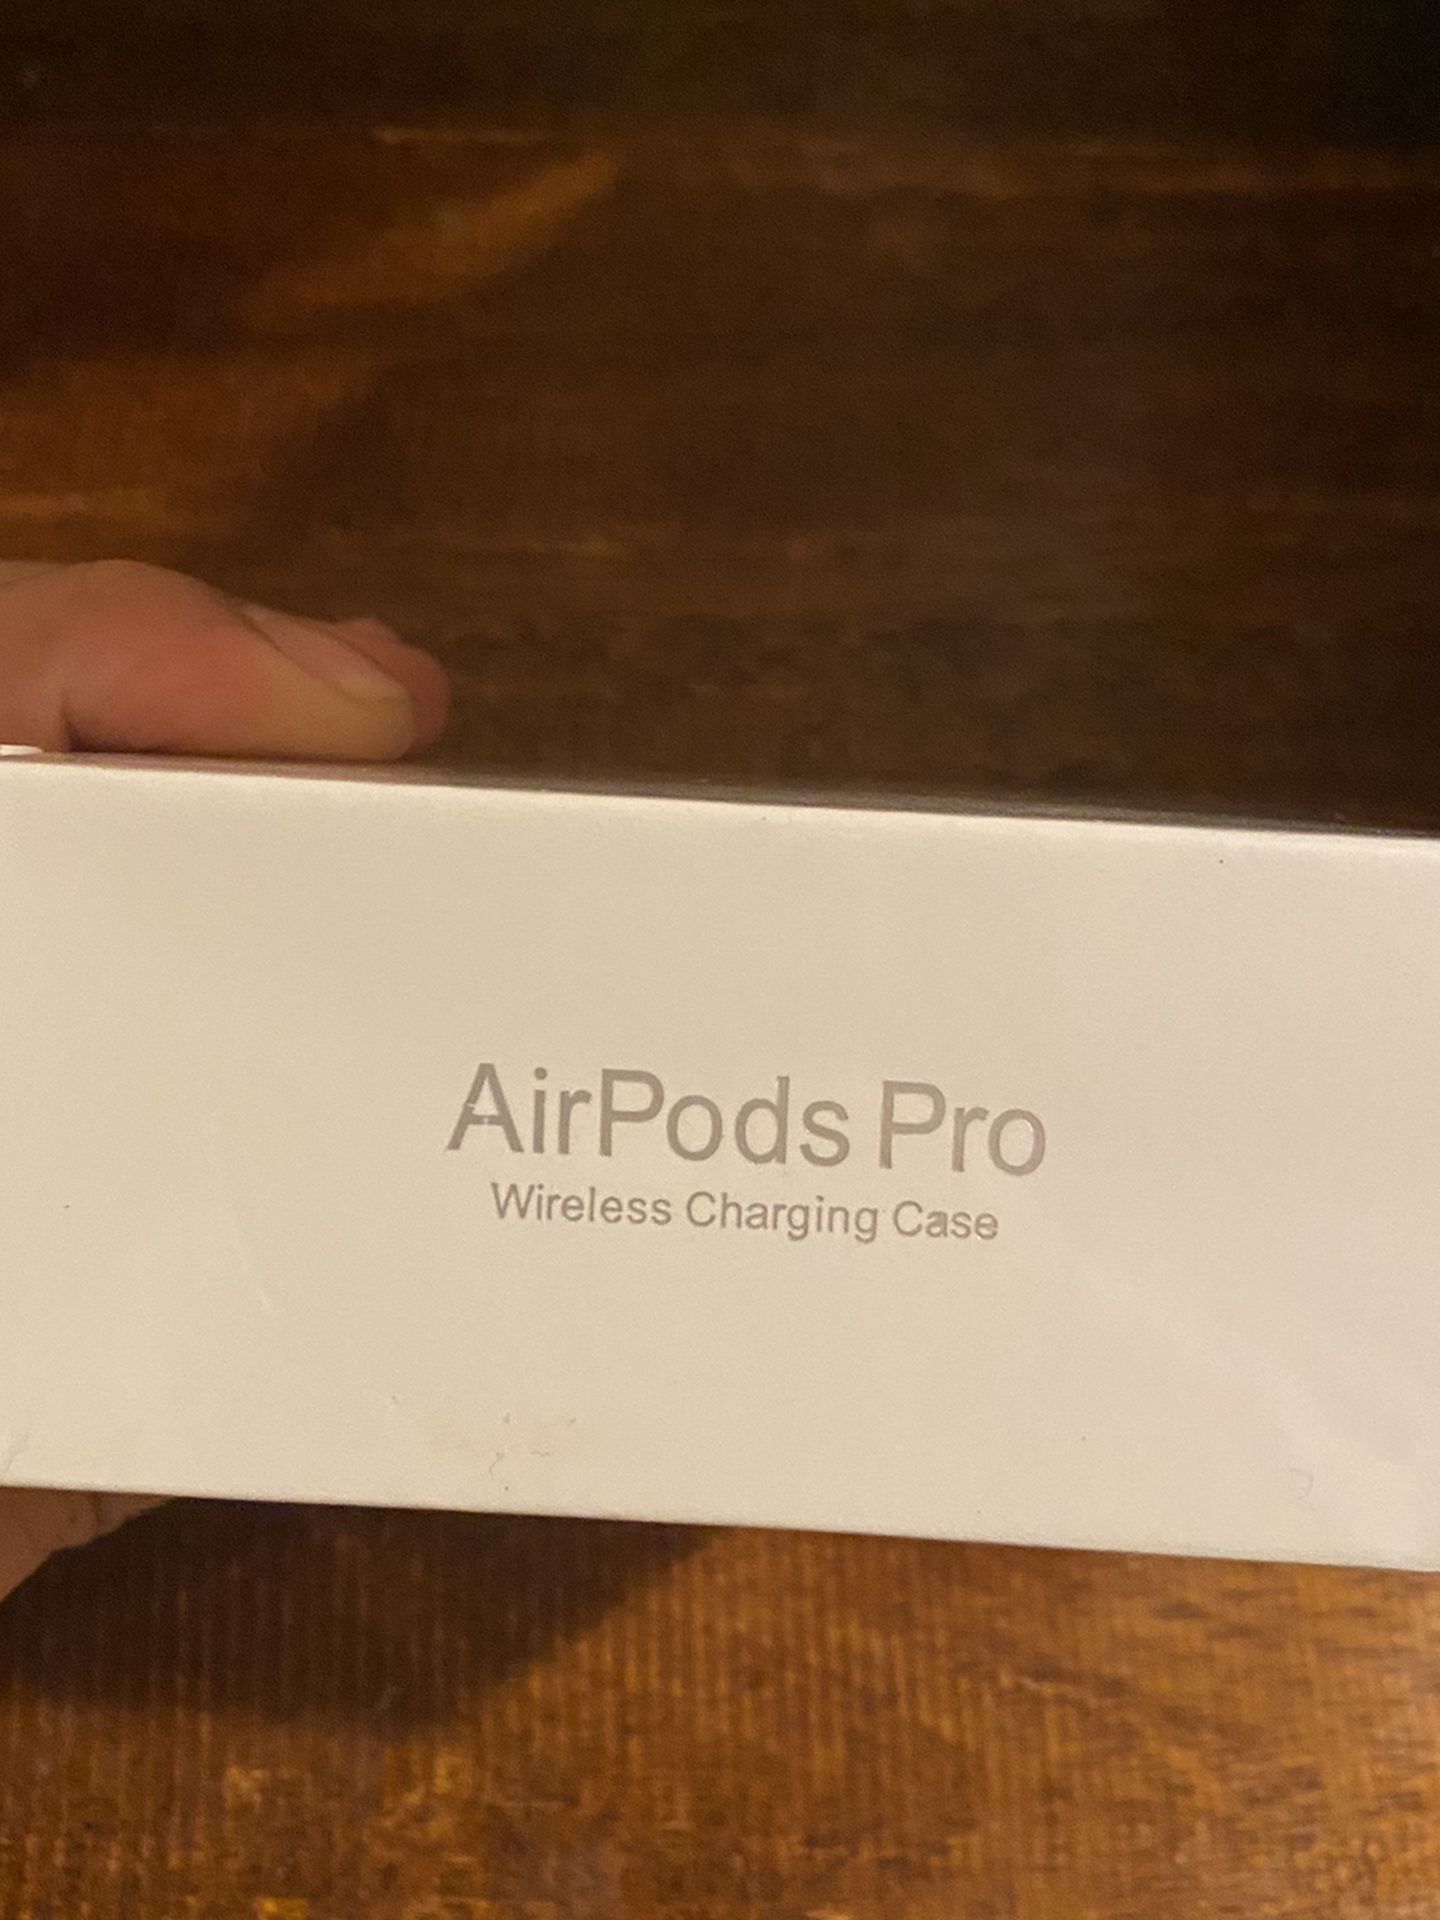 Brand new Airpods Pro